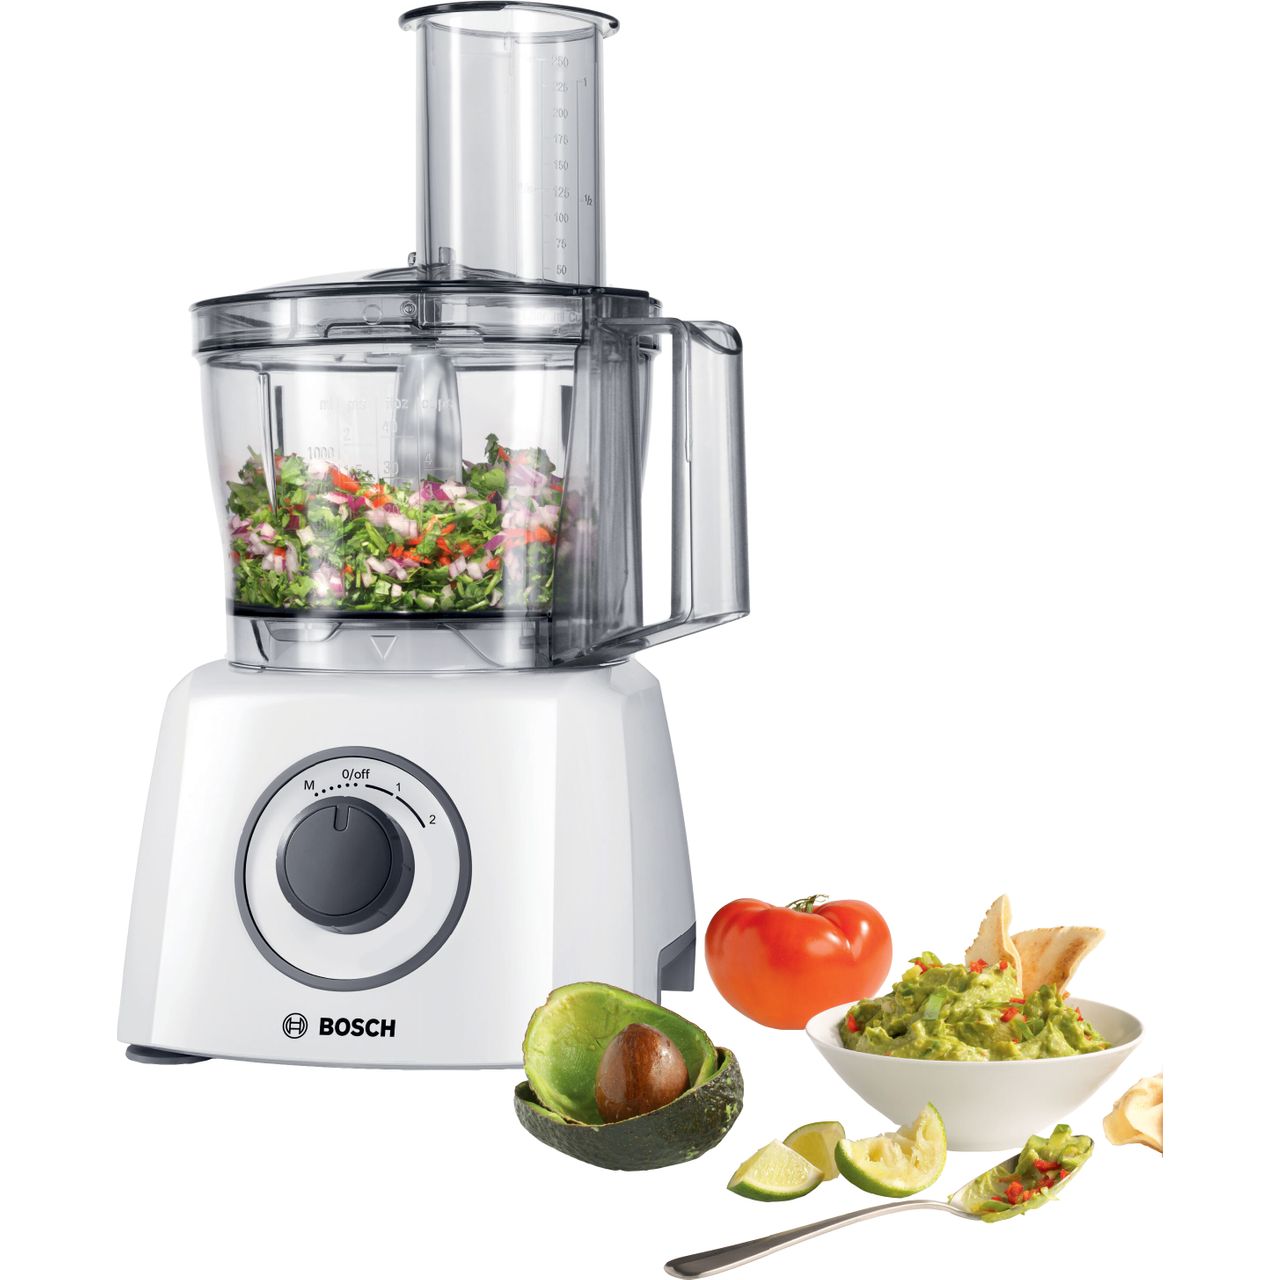 Bosch MultiTalent 3 MCM3100WGB 2.3 Litre Food Processor With 9 Accessories Review